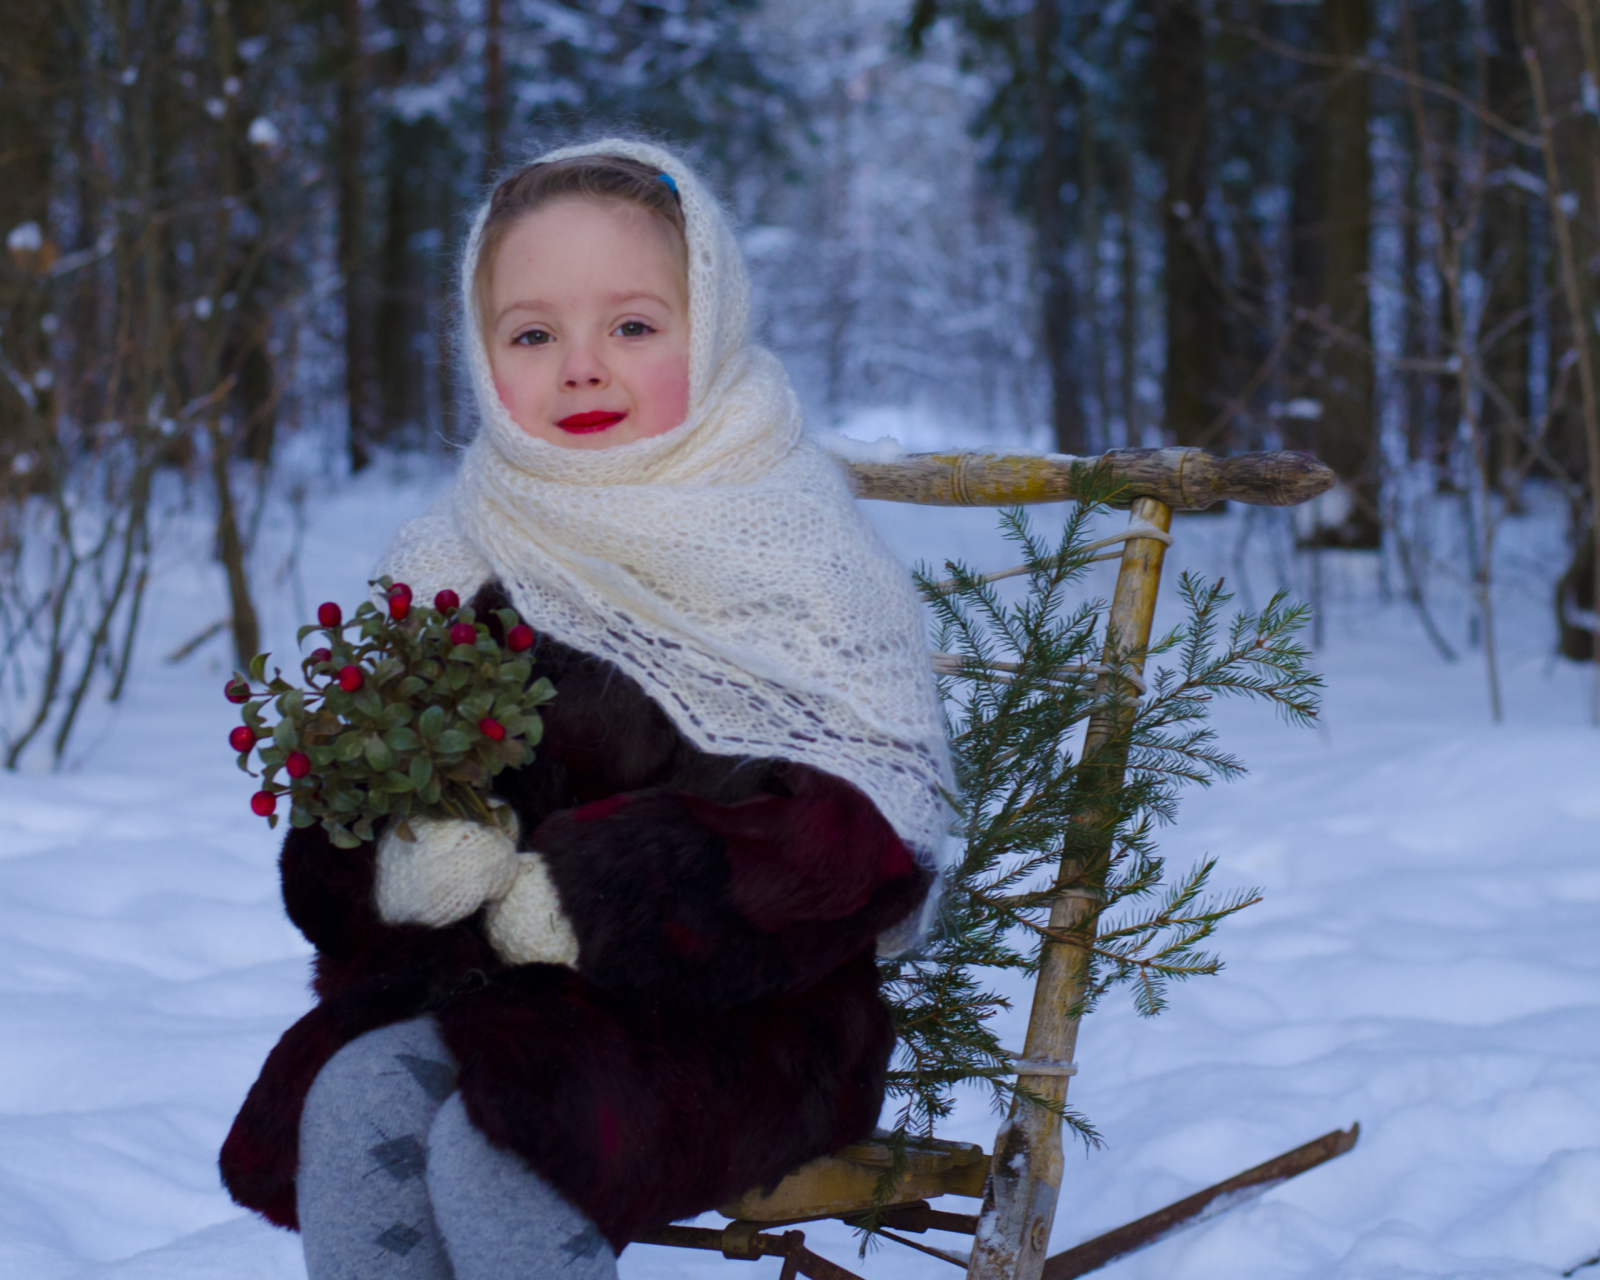 Little Girl In Winter Outfit wallpaper 1600x1280